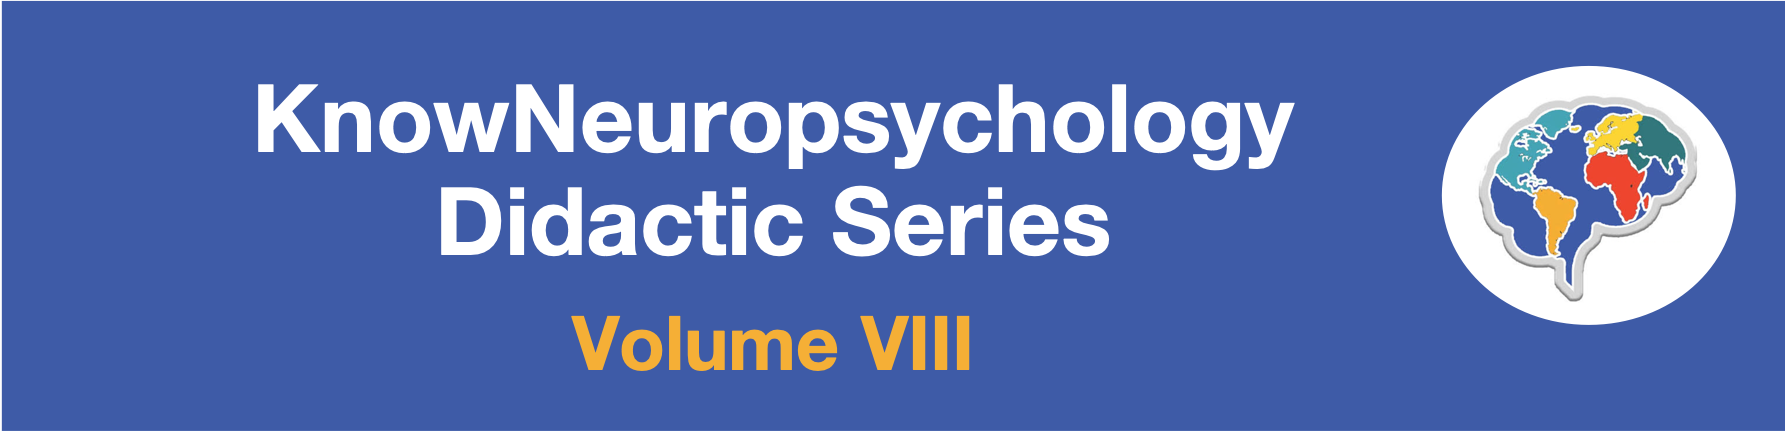 KnowNeuropsychology Didactic Series Volume 8